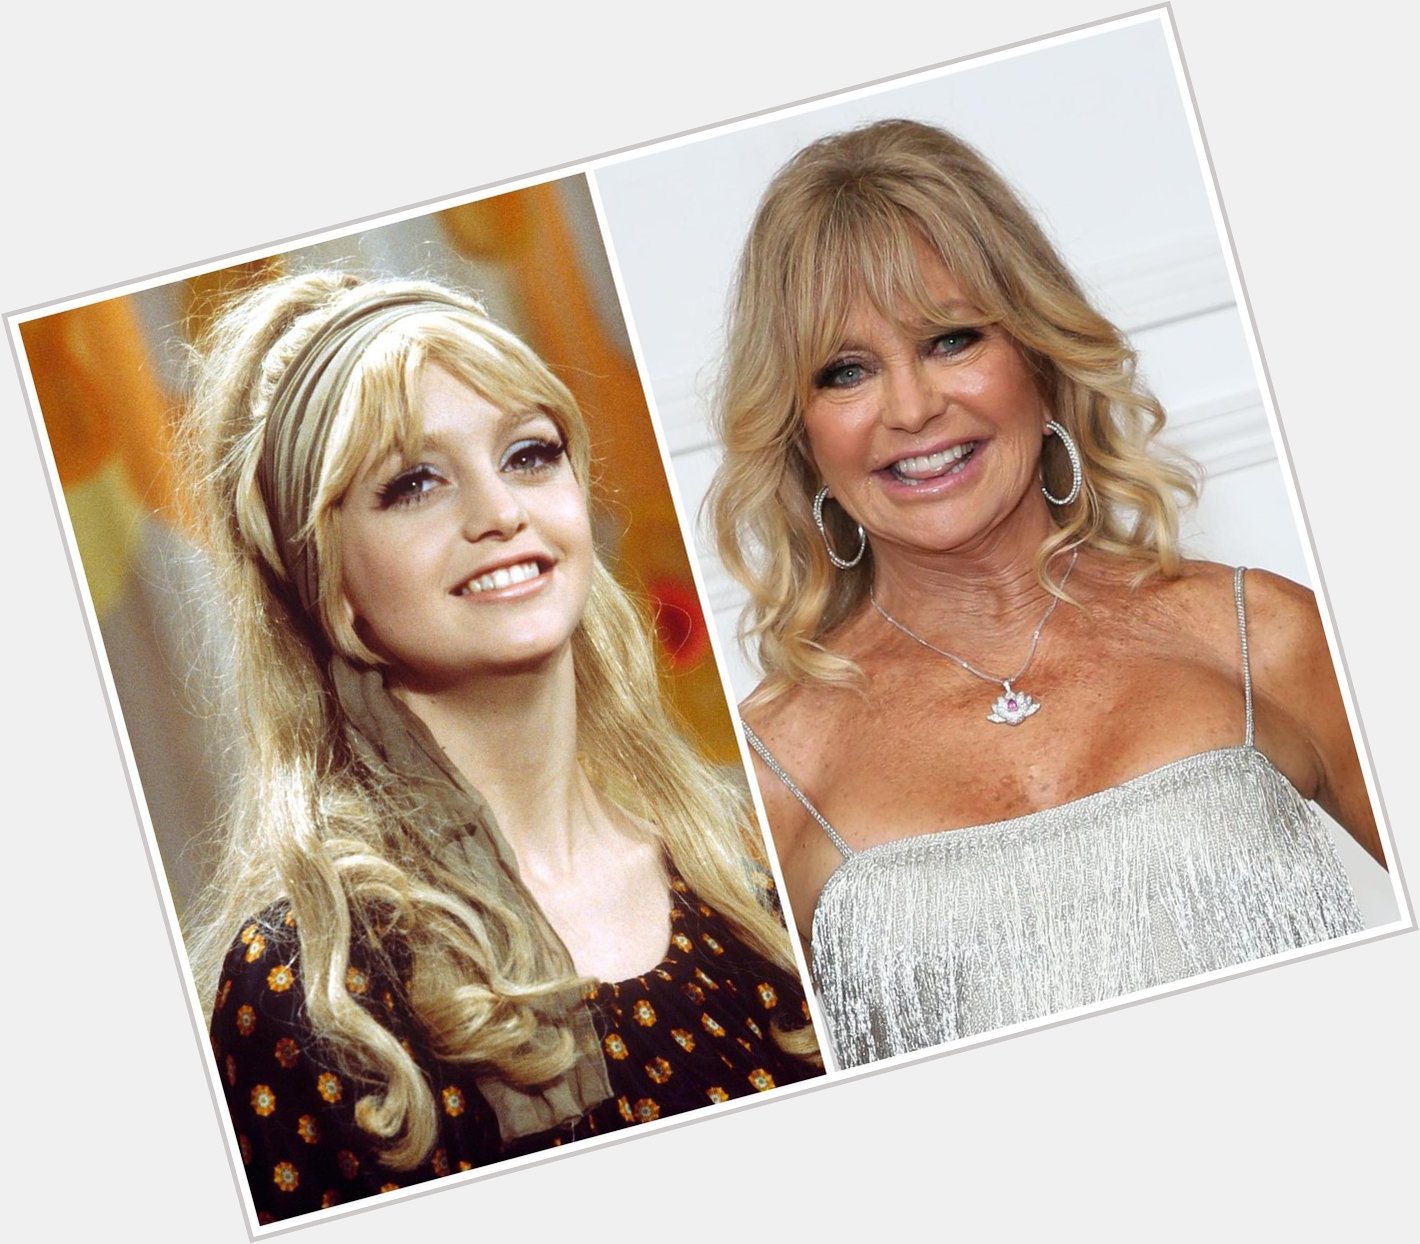 Happy Birthday Goldie Hawn! The beloved actress turns 77 today! 